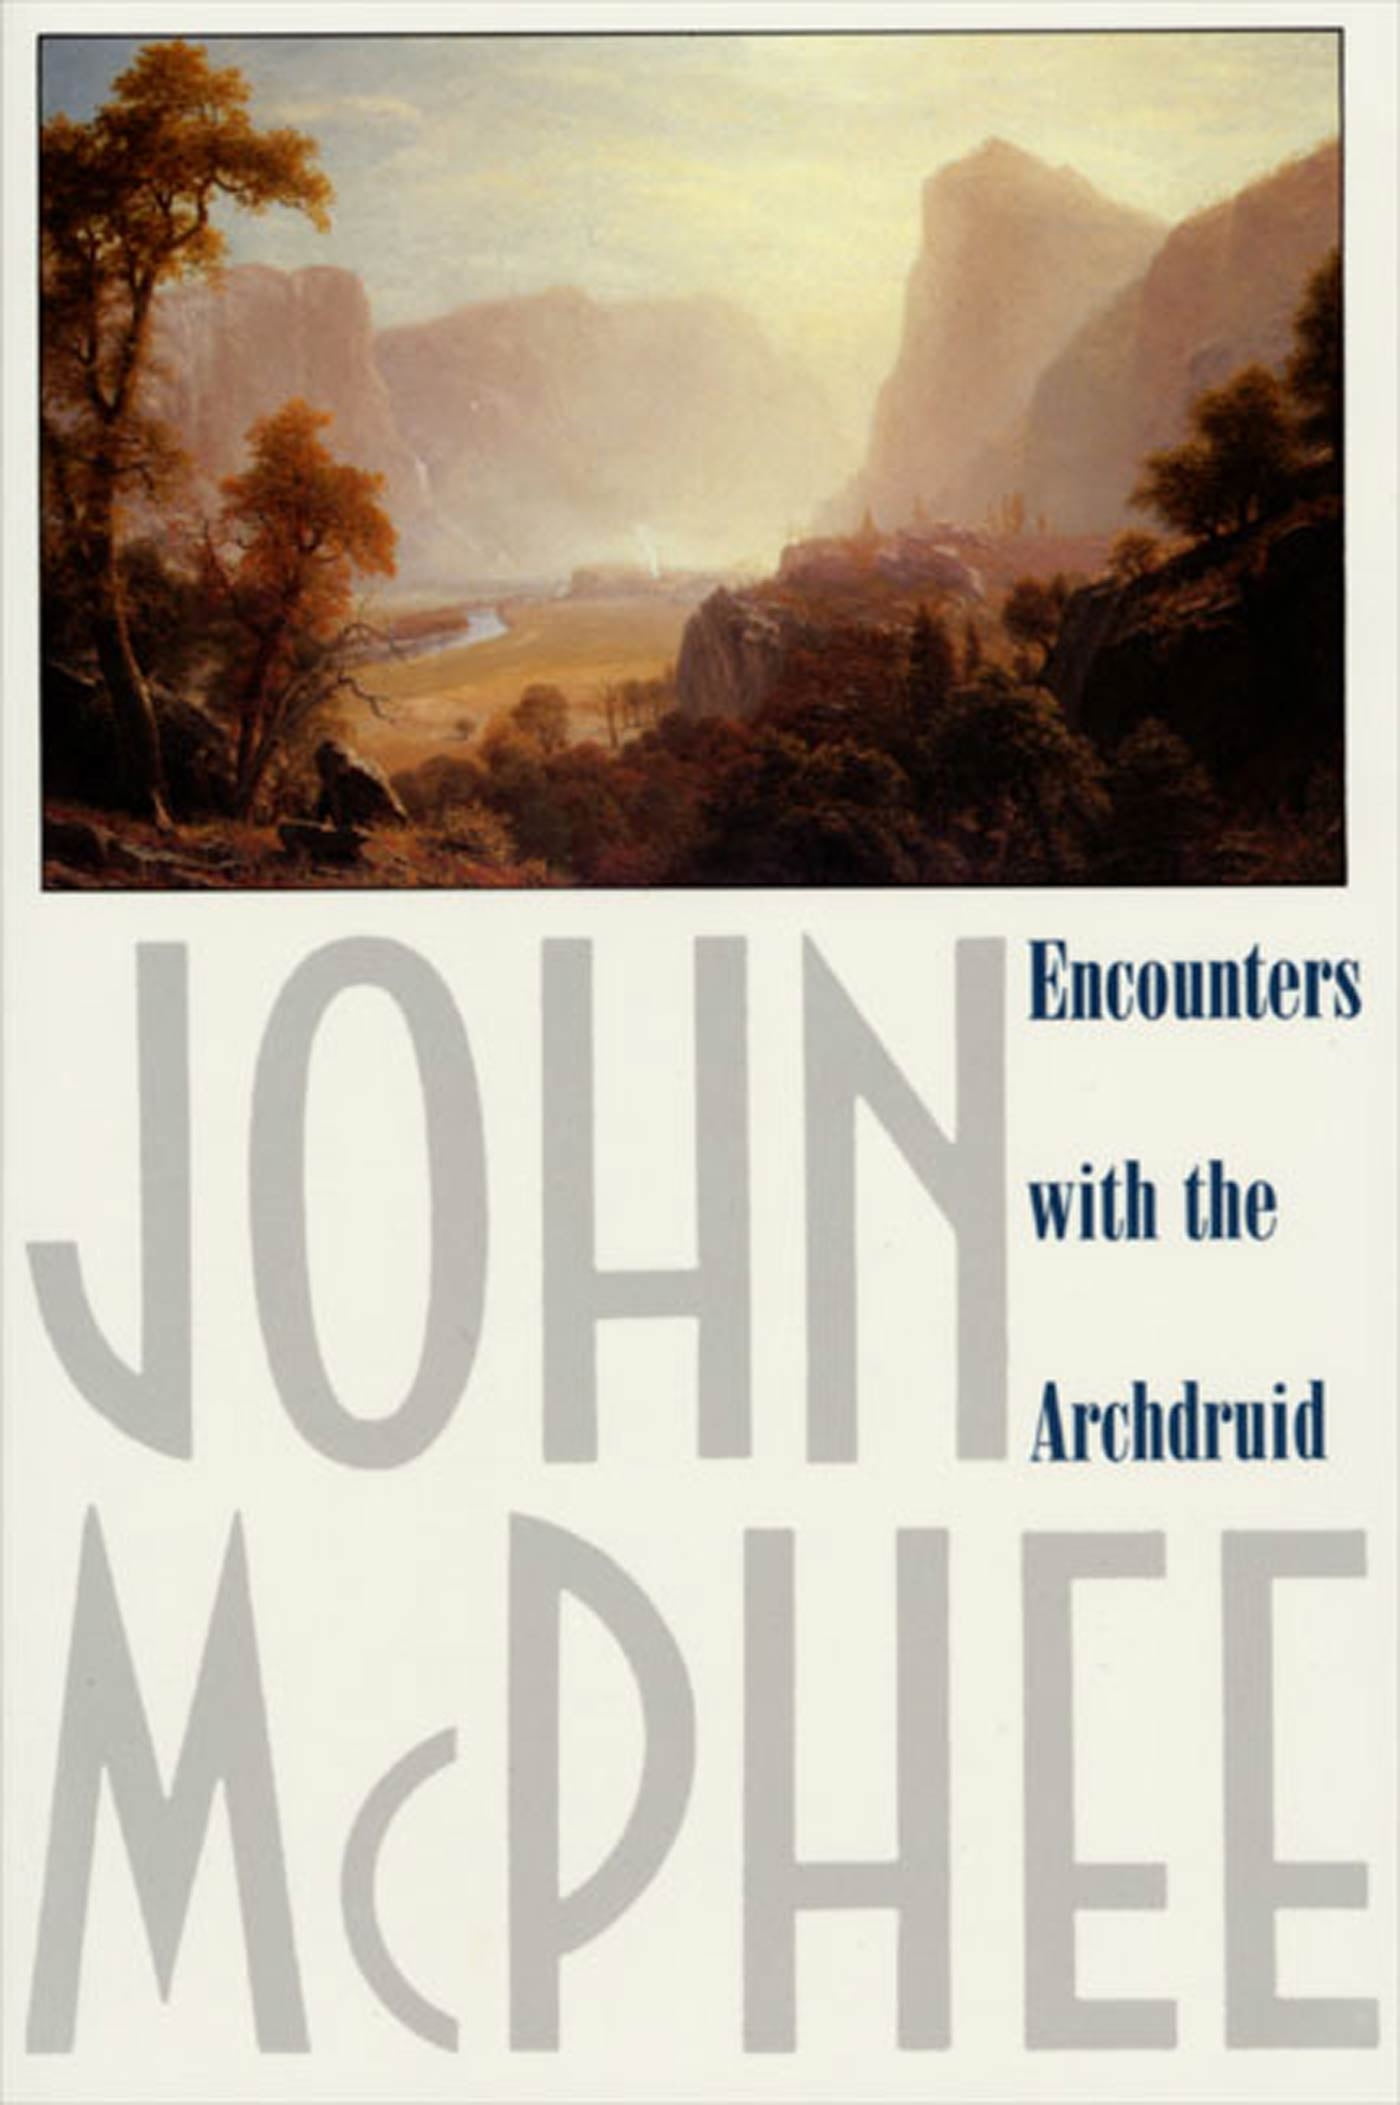 Encounters-with-the-Archdruid-Narratives-About-a-Conservationist-and-Three-of-His-Natural-Enemies